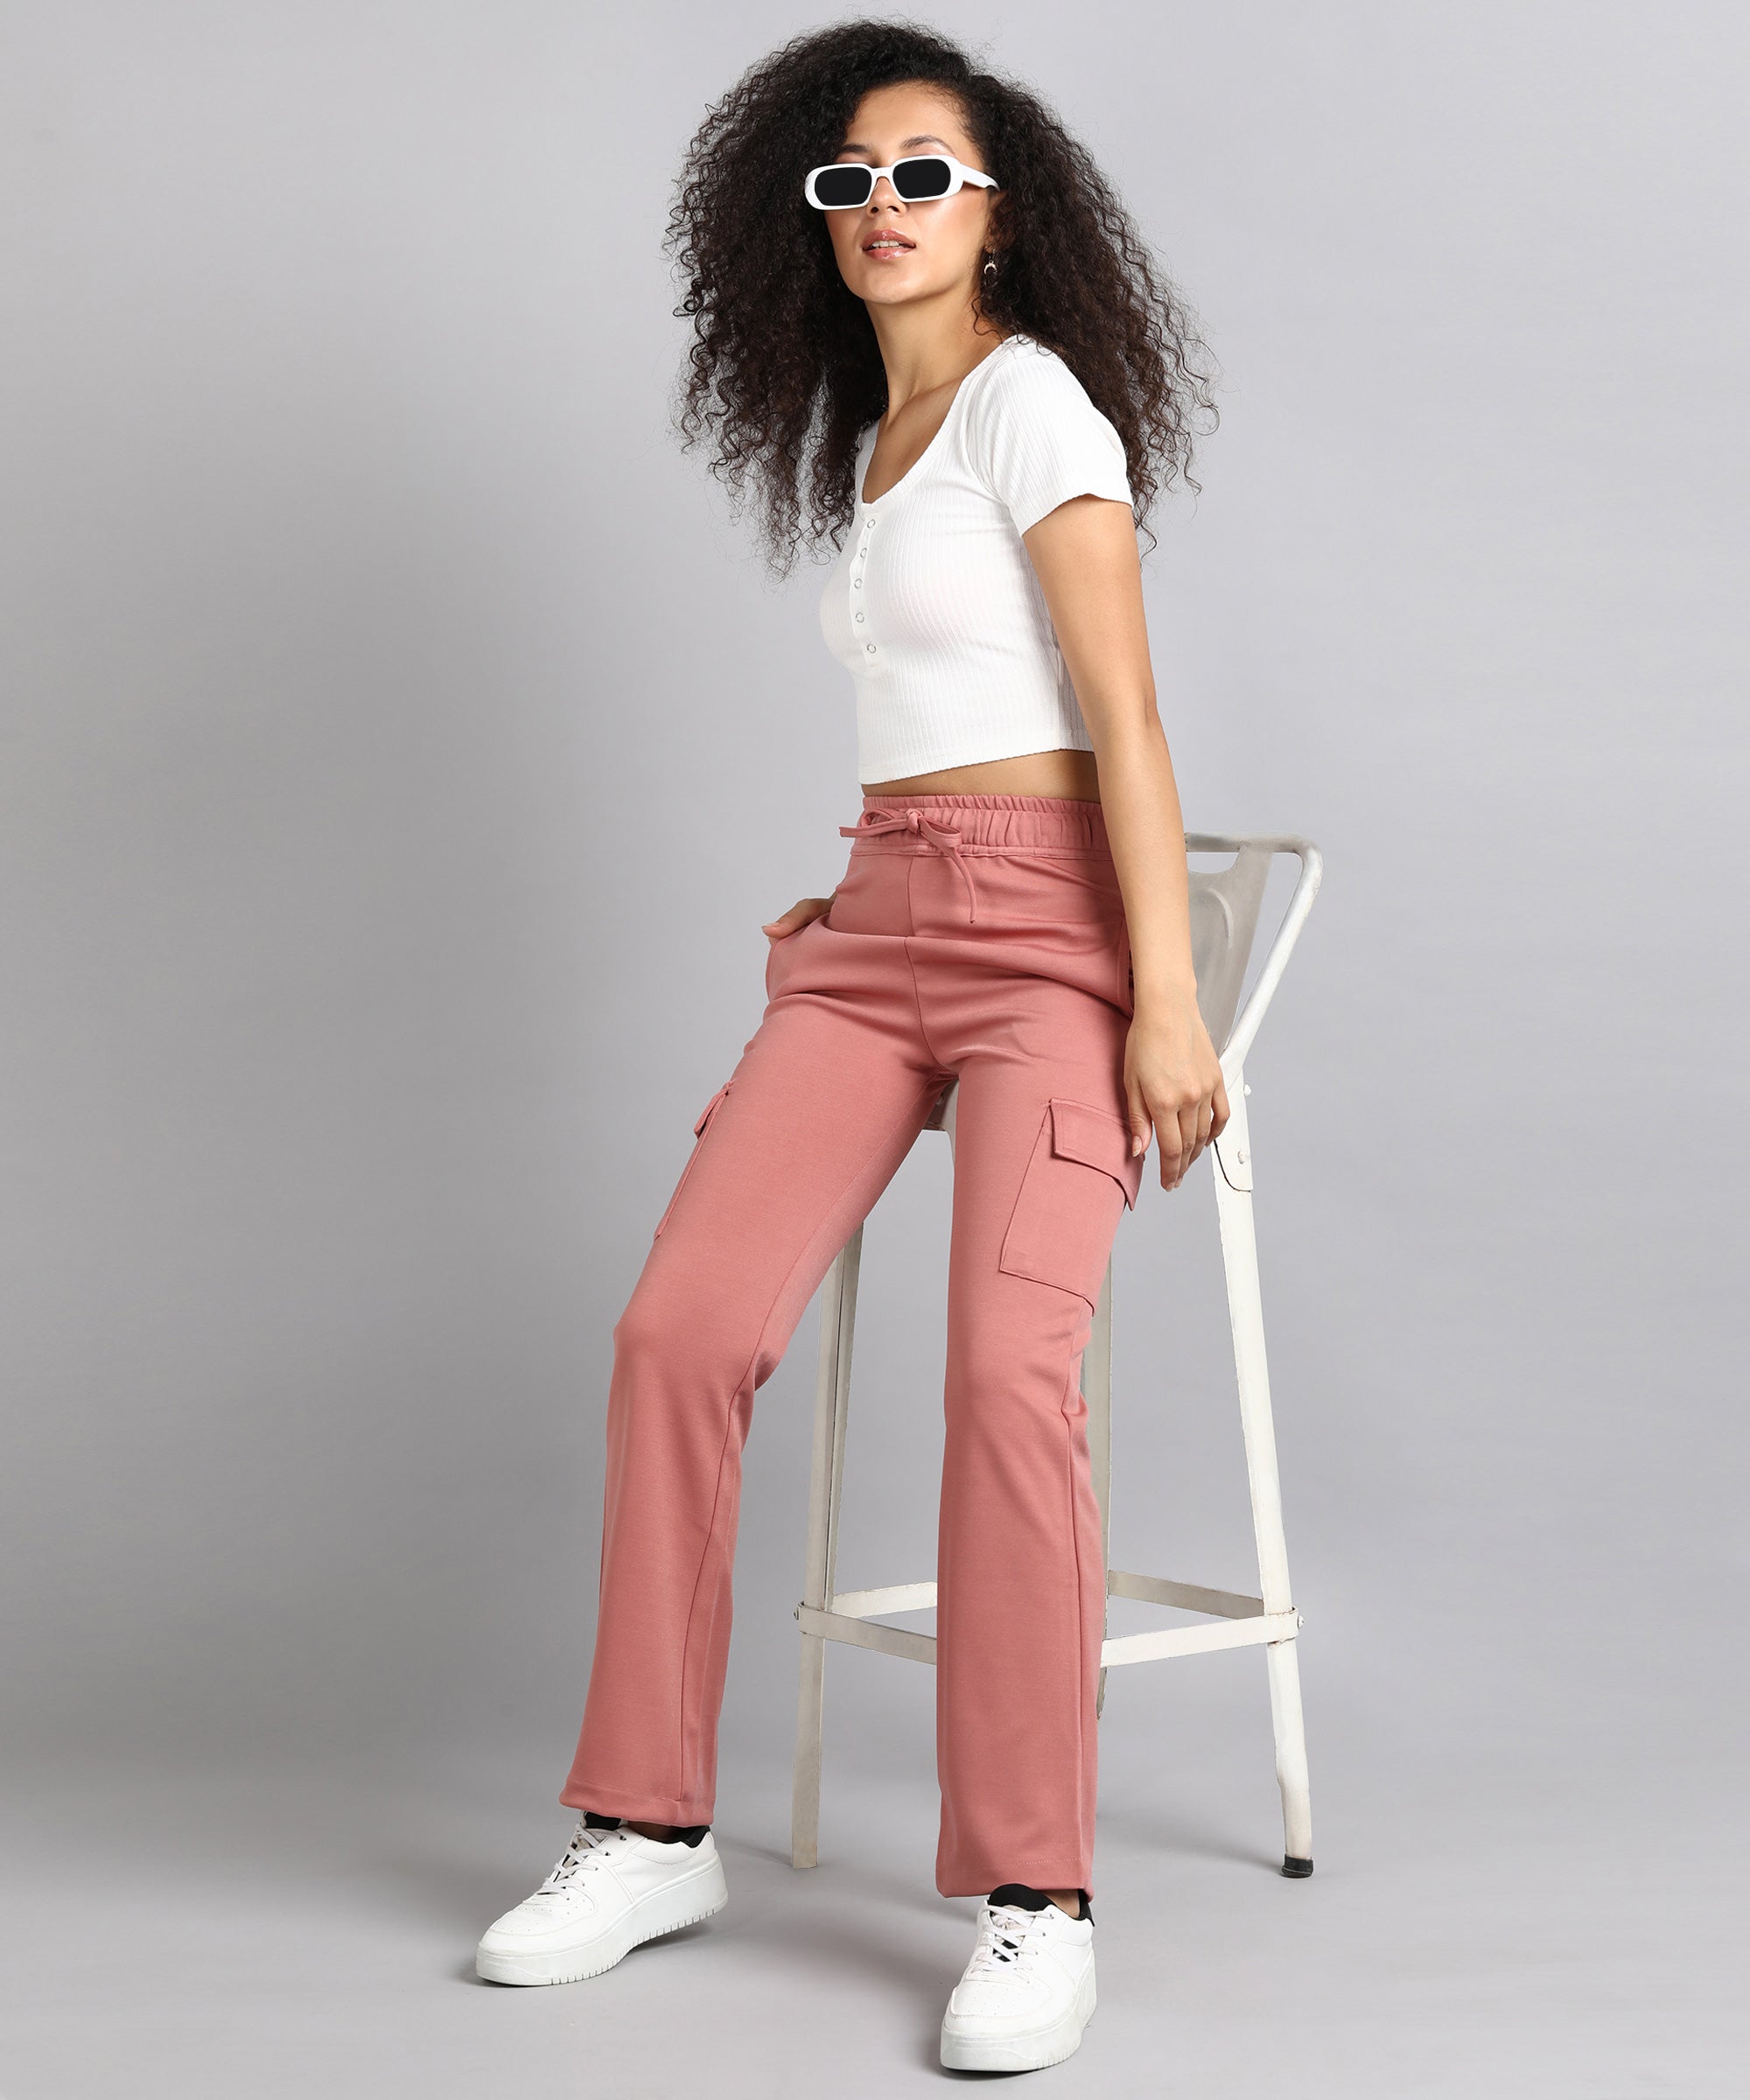 XFLWAM Dress Pants for Women Comfort Stretchy Slacks Work Pants Straight  Leg/Pull On with Pockets for Business Casual Pink S - Walmart.com